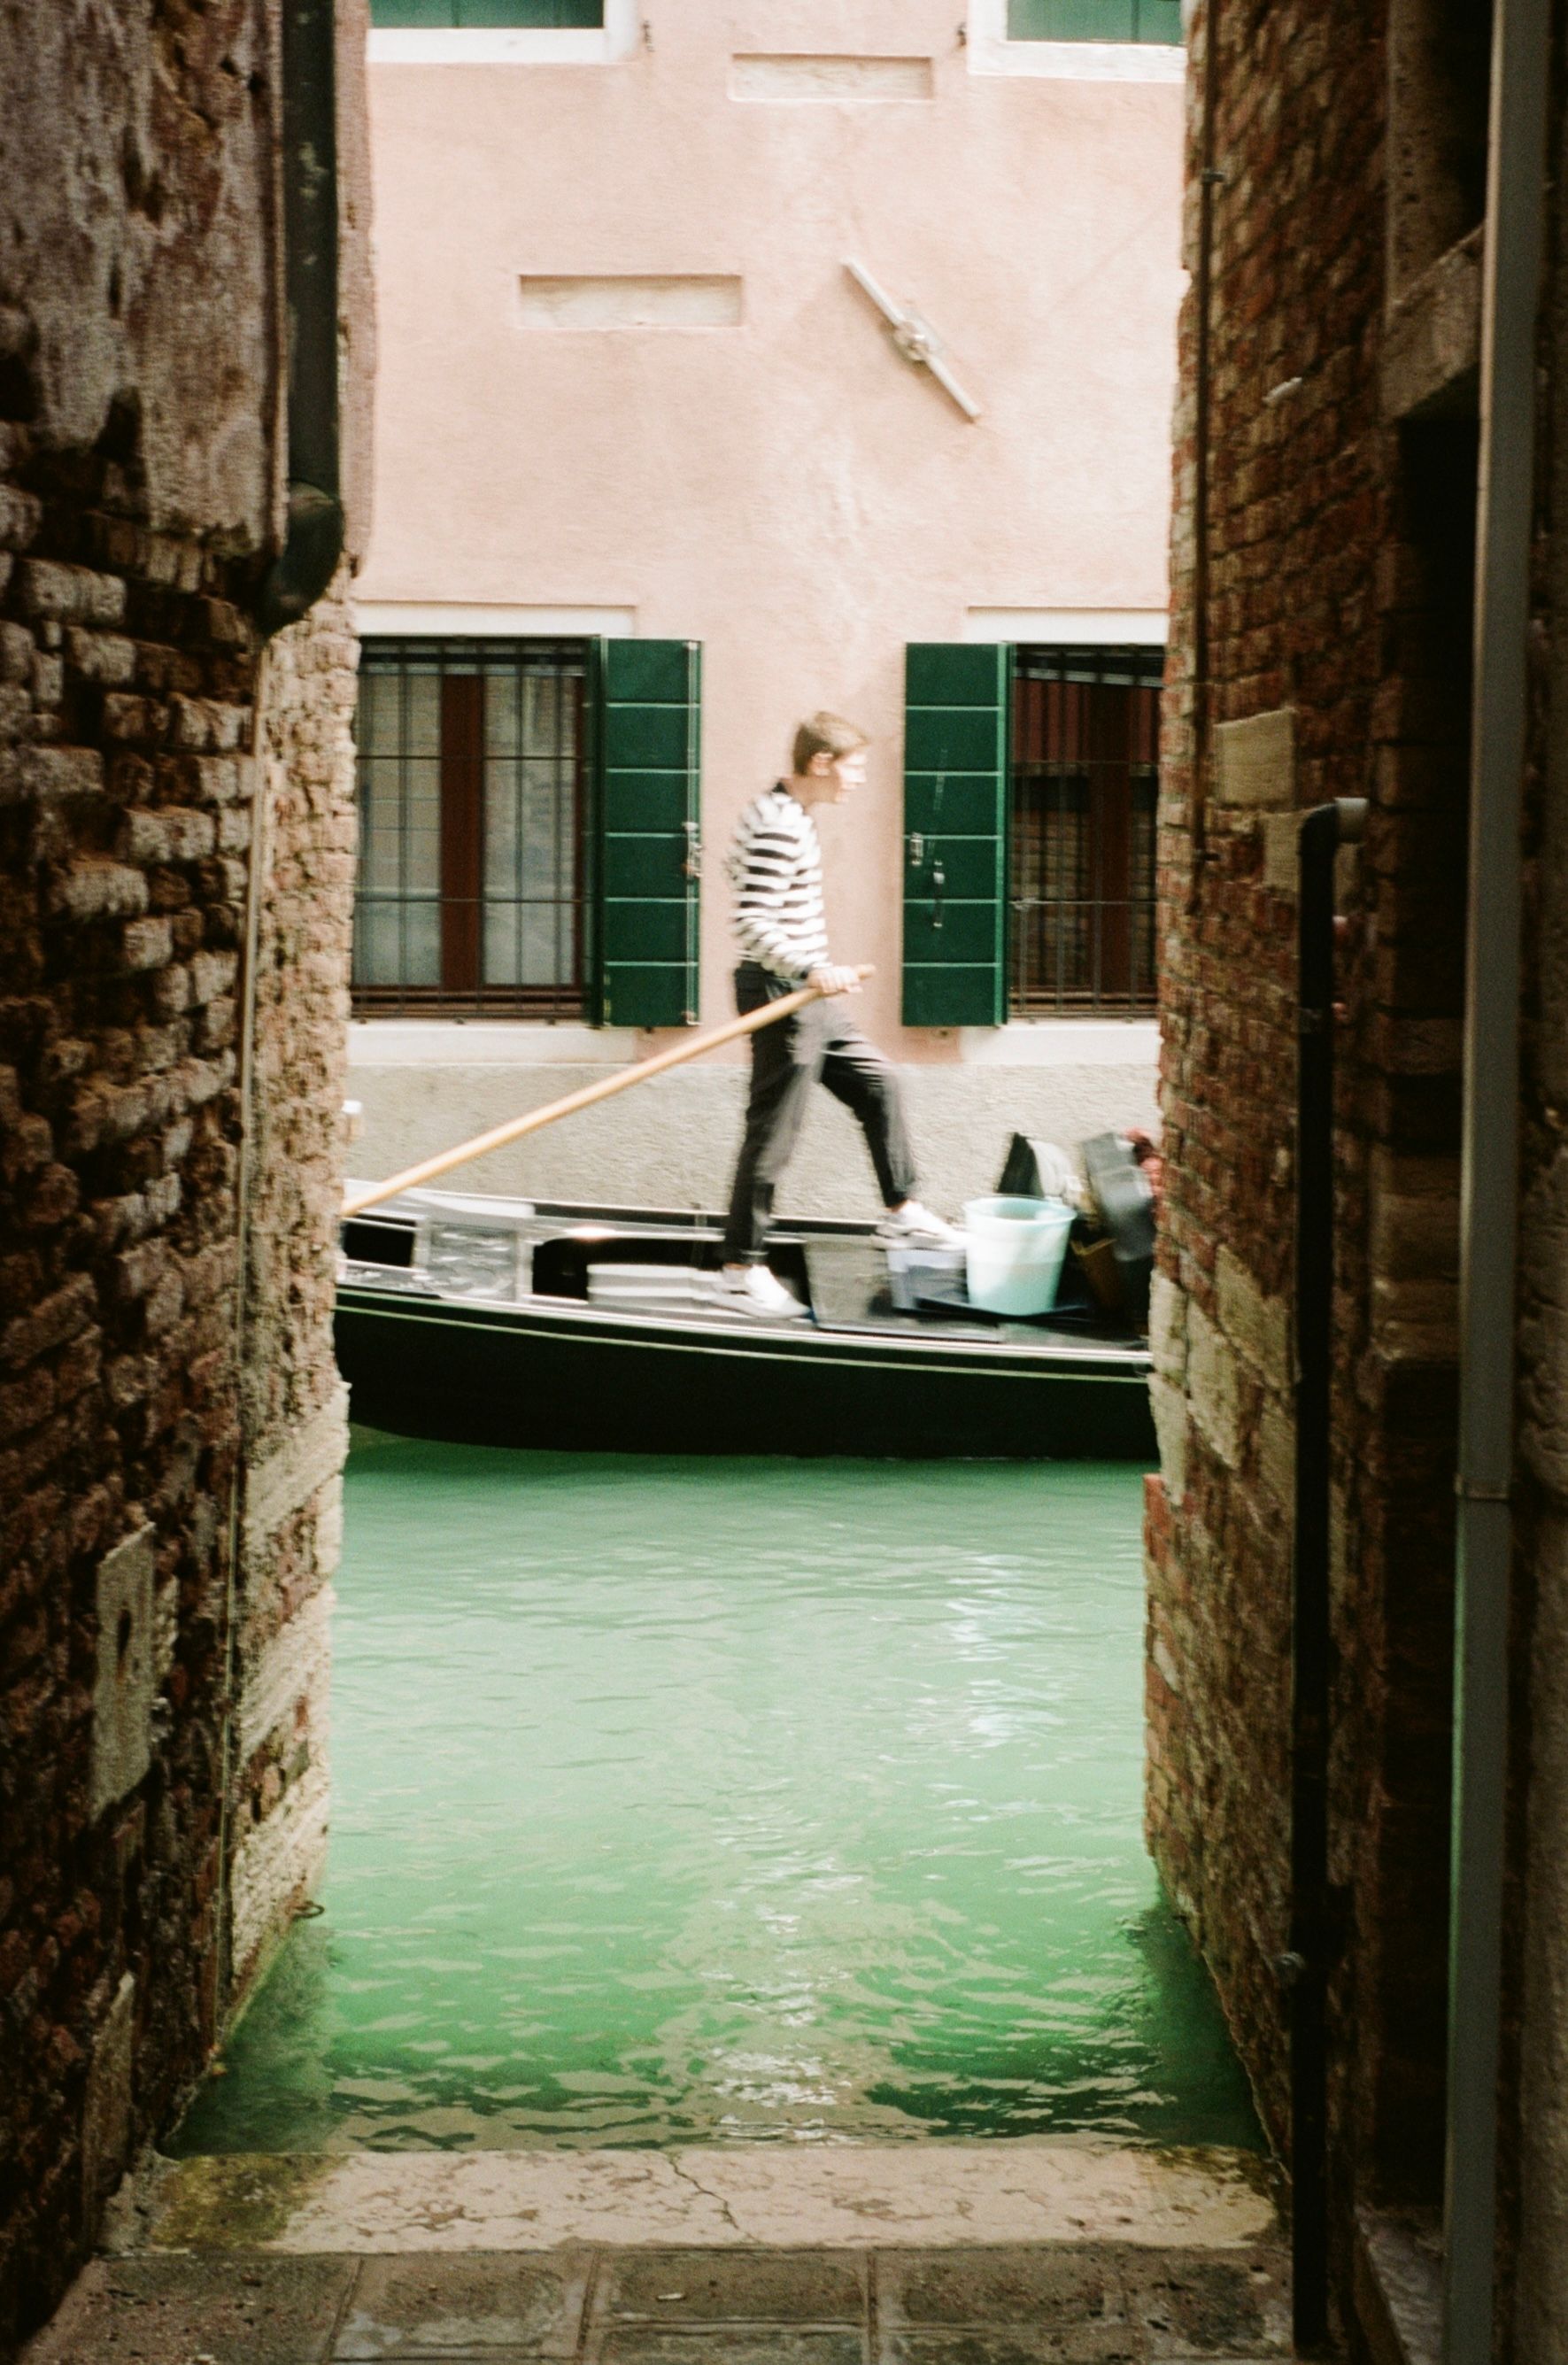 Down an alley that terminates in a canal with the water almost flooding the pavement, green shutters on the walls opposite; a young gondolier, male, lithe, with brown hair and in the iconic white-and-dark-blue stripy jersey, stands on his vessel, oar comfortably pointing aft with his right hand resting on it. He shoots off to the right with ease.